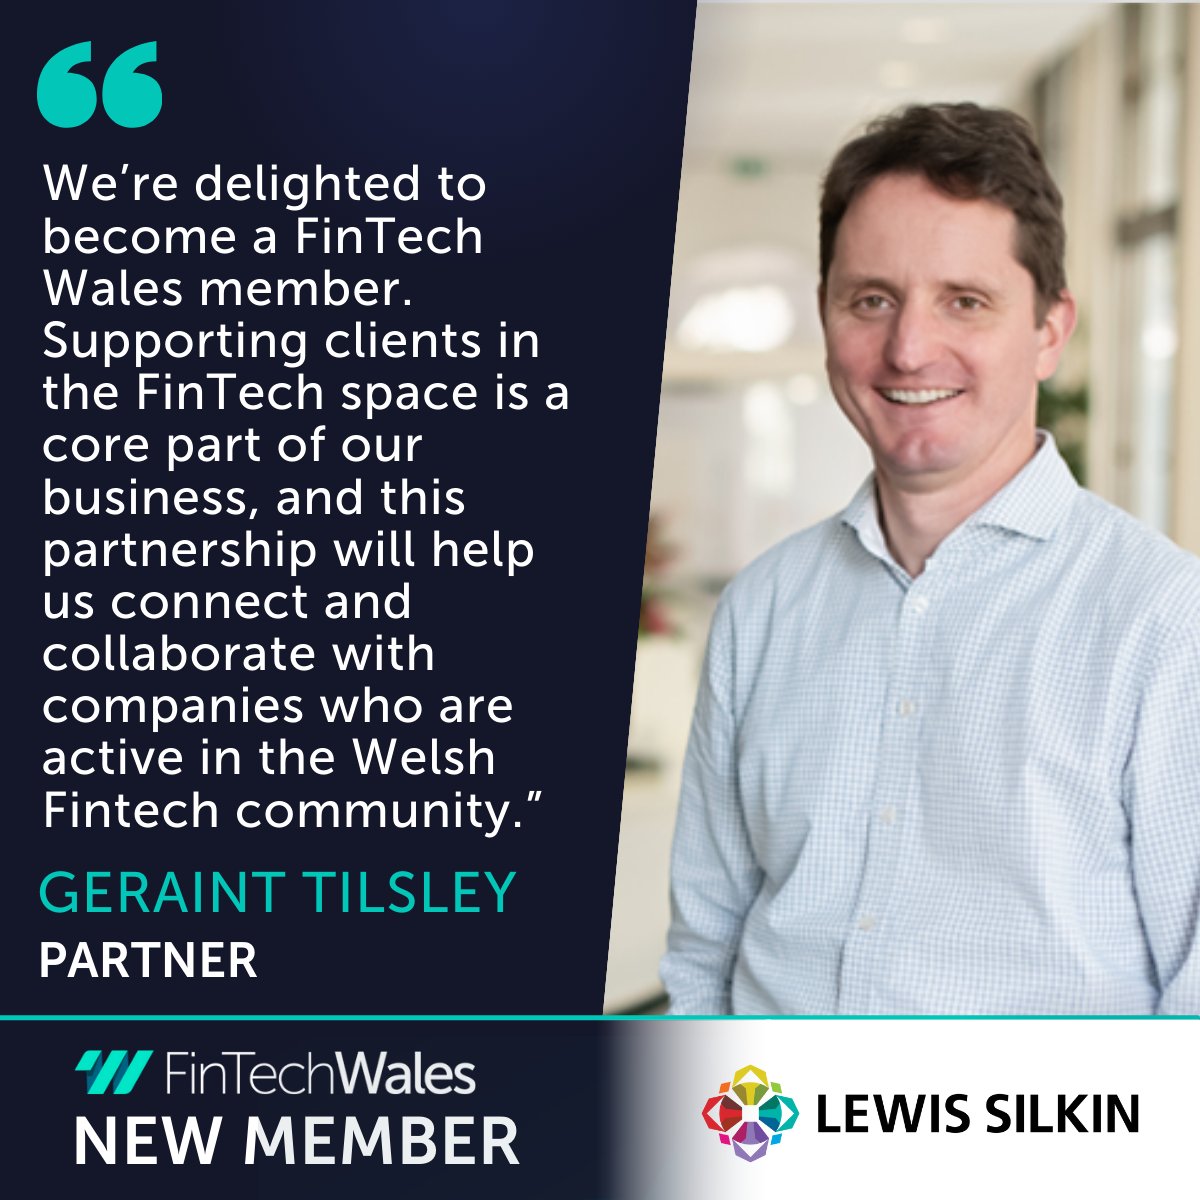 Welcome to FinTech Wales membership @LewisSilkin! 🏴󠁧󠁢󠁷󠁬󠁳󠁿 A top 60 law firm specializing in safeguarding businesses' core assets: ideas, people, and future prospects. Their expertise in creativity, technology, and innovation makes them a valuable addition to our community.